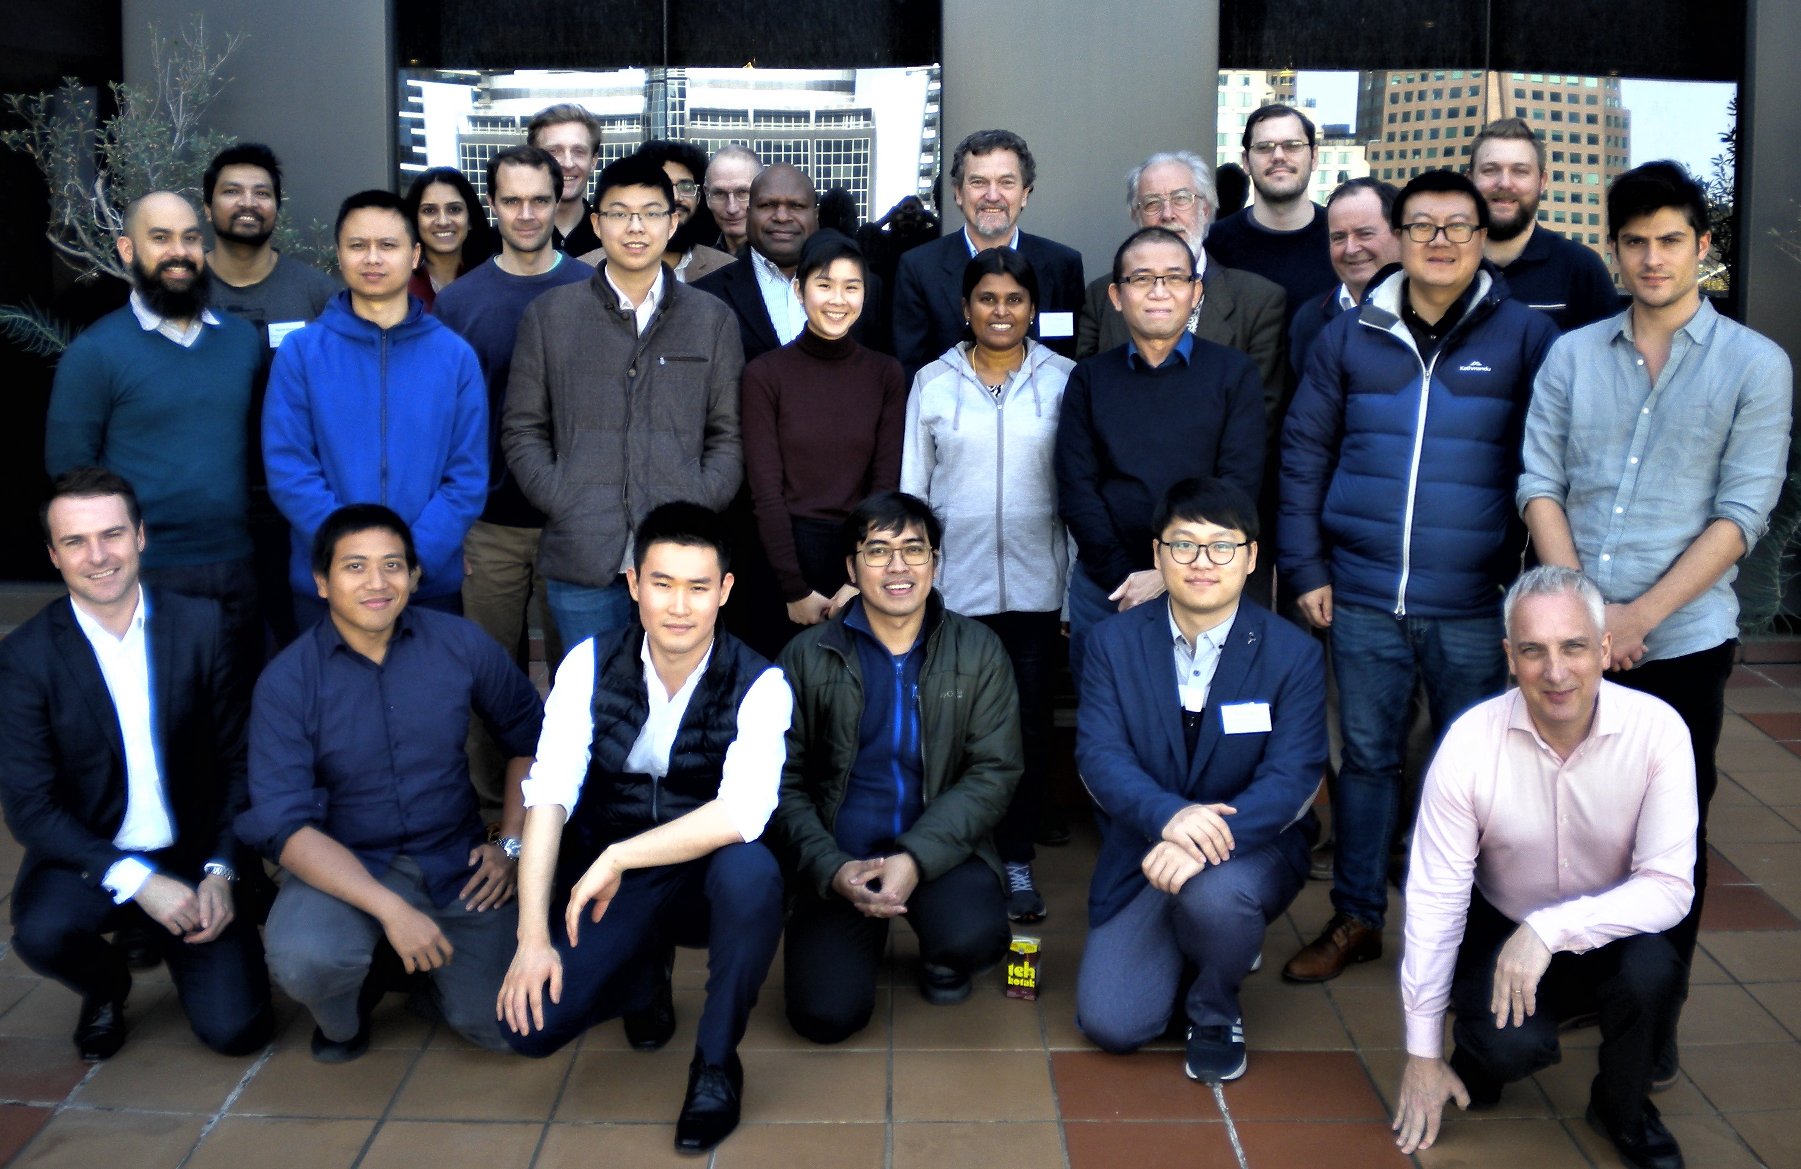 July 2019 Practical CGE course held at Victoria University, Melbourne